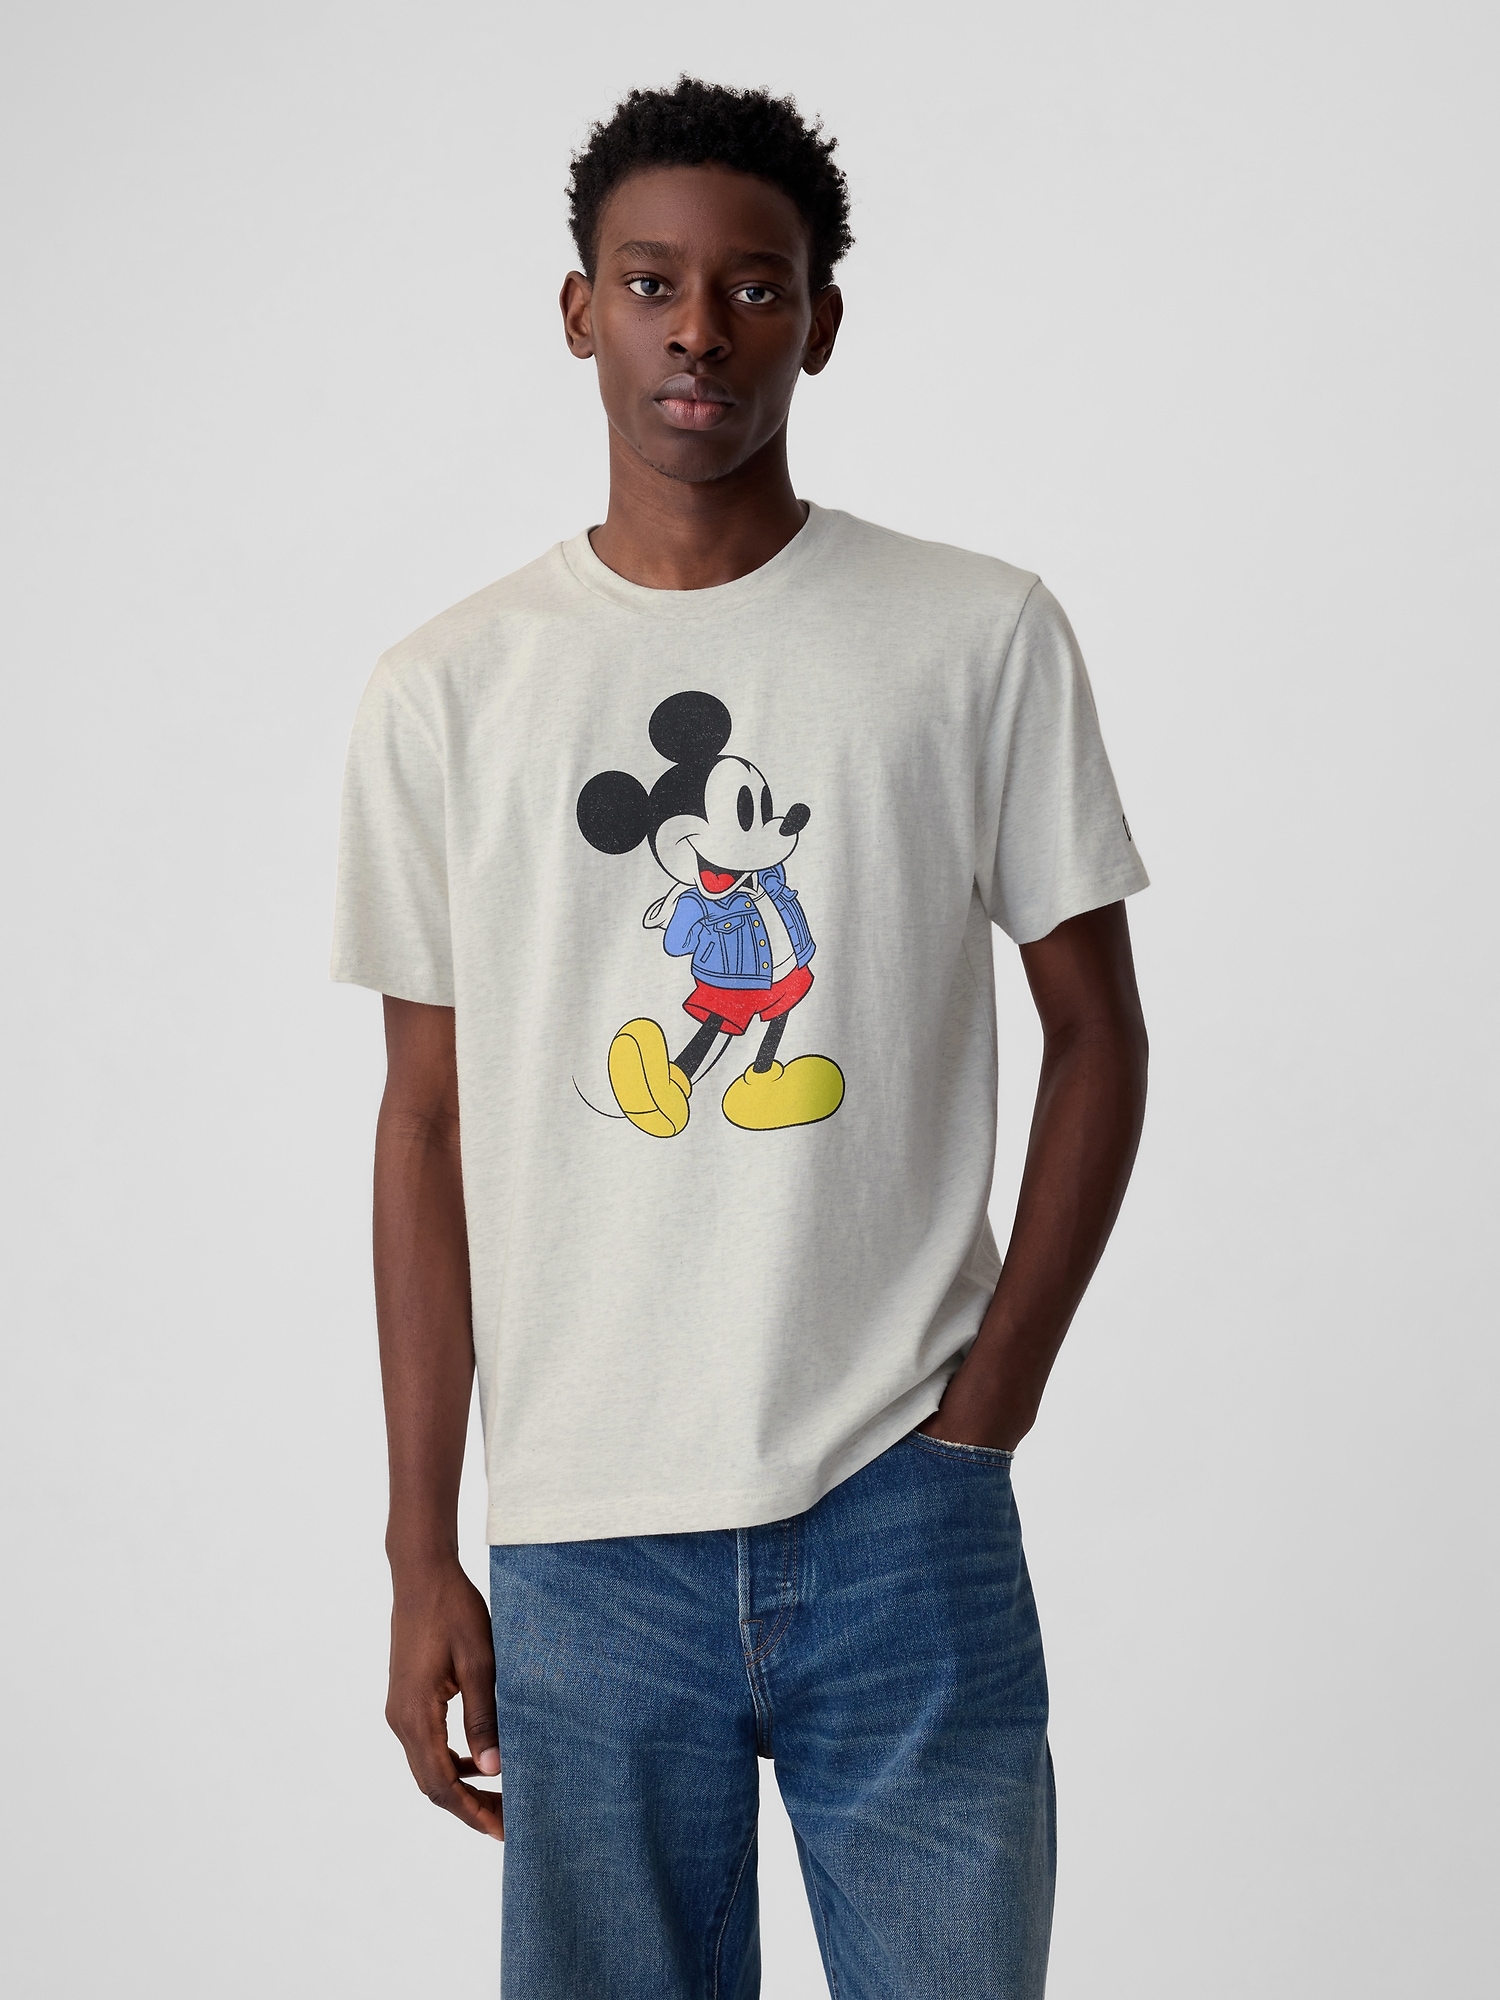 Gap × Disney Mickey Mouse Graphic T-shirt In Pale Heather Grey